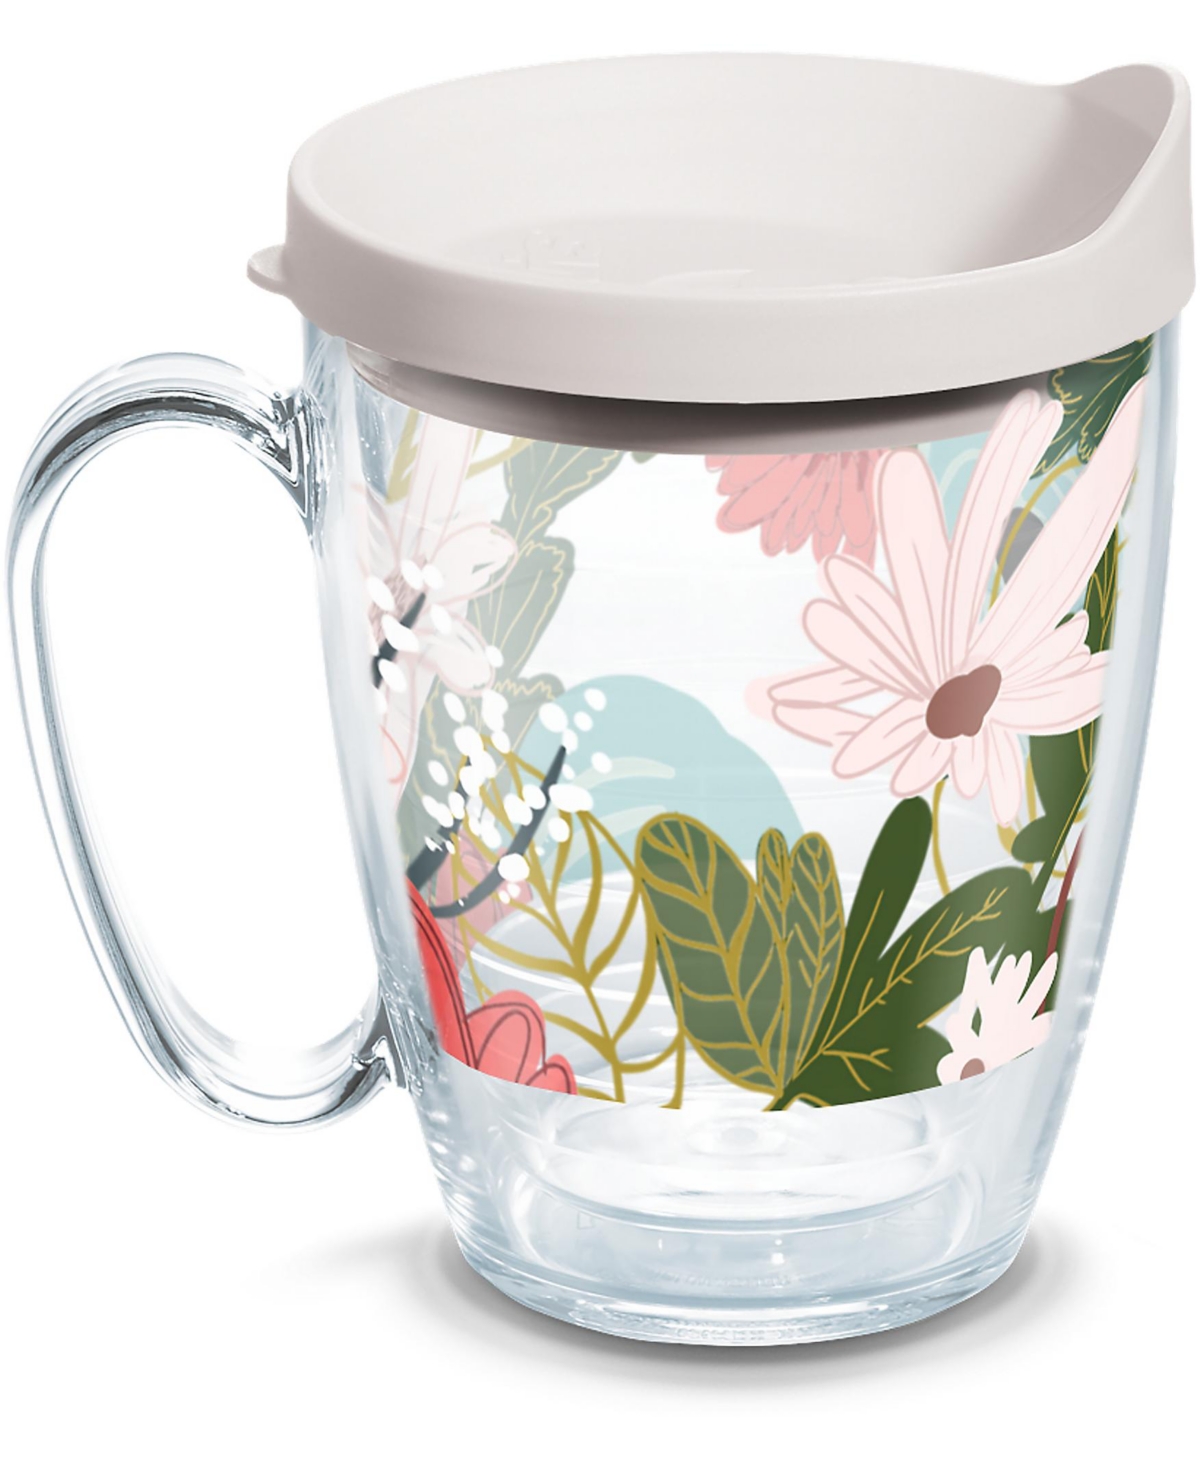 Tervis Tumbler Tervis Mellow Floral Made In Usa Double Walled Insulated Tumbler Travel Cup Keeps Drinks Cold & Hot, In Open Miscellaneous